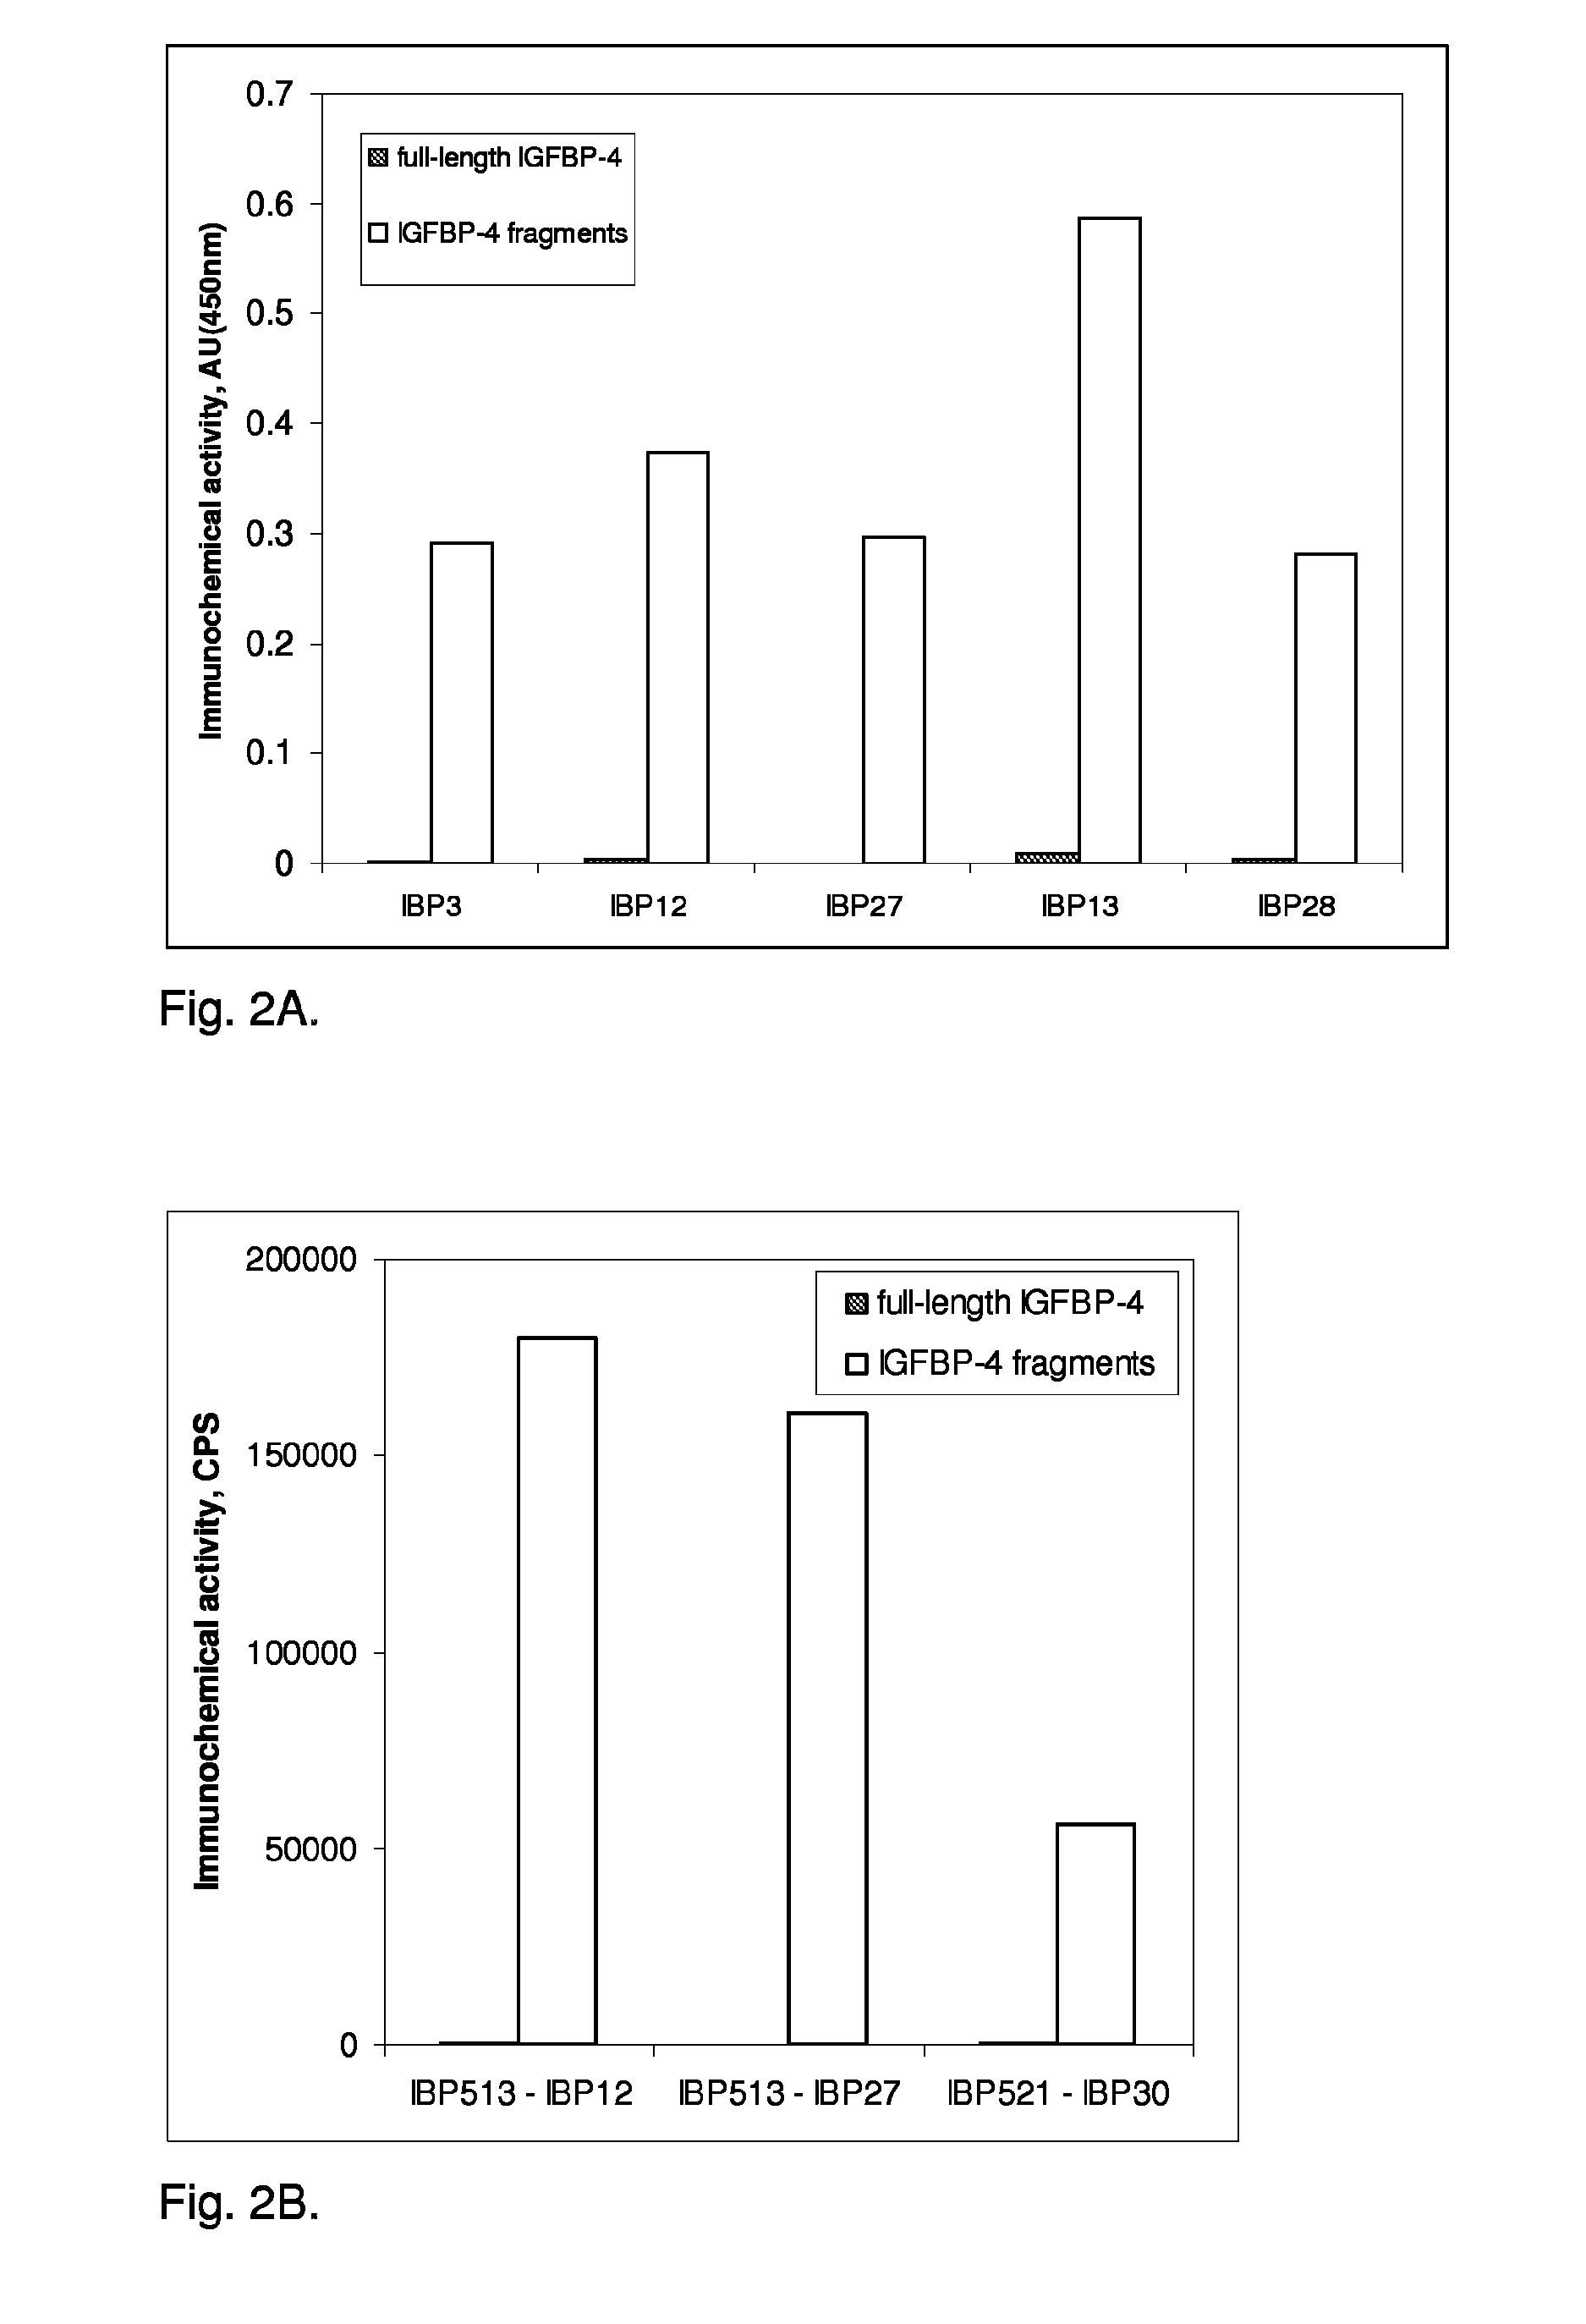 Diagnostic kit for IGFBP-4 proteolytic fragments in a patient sample